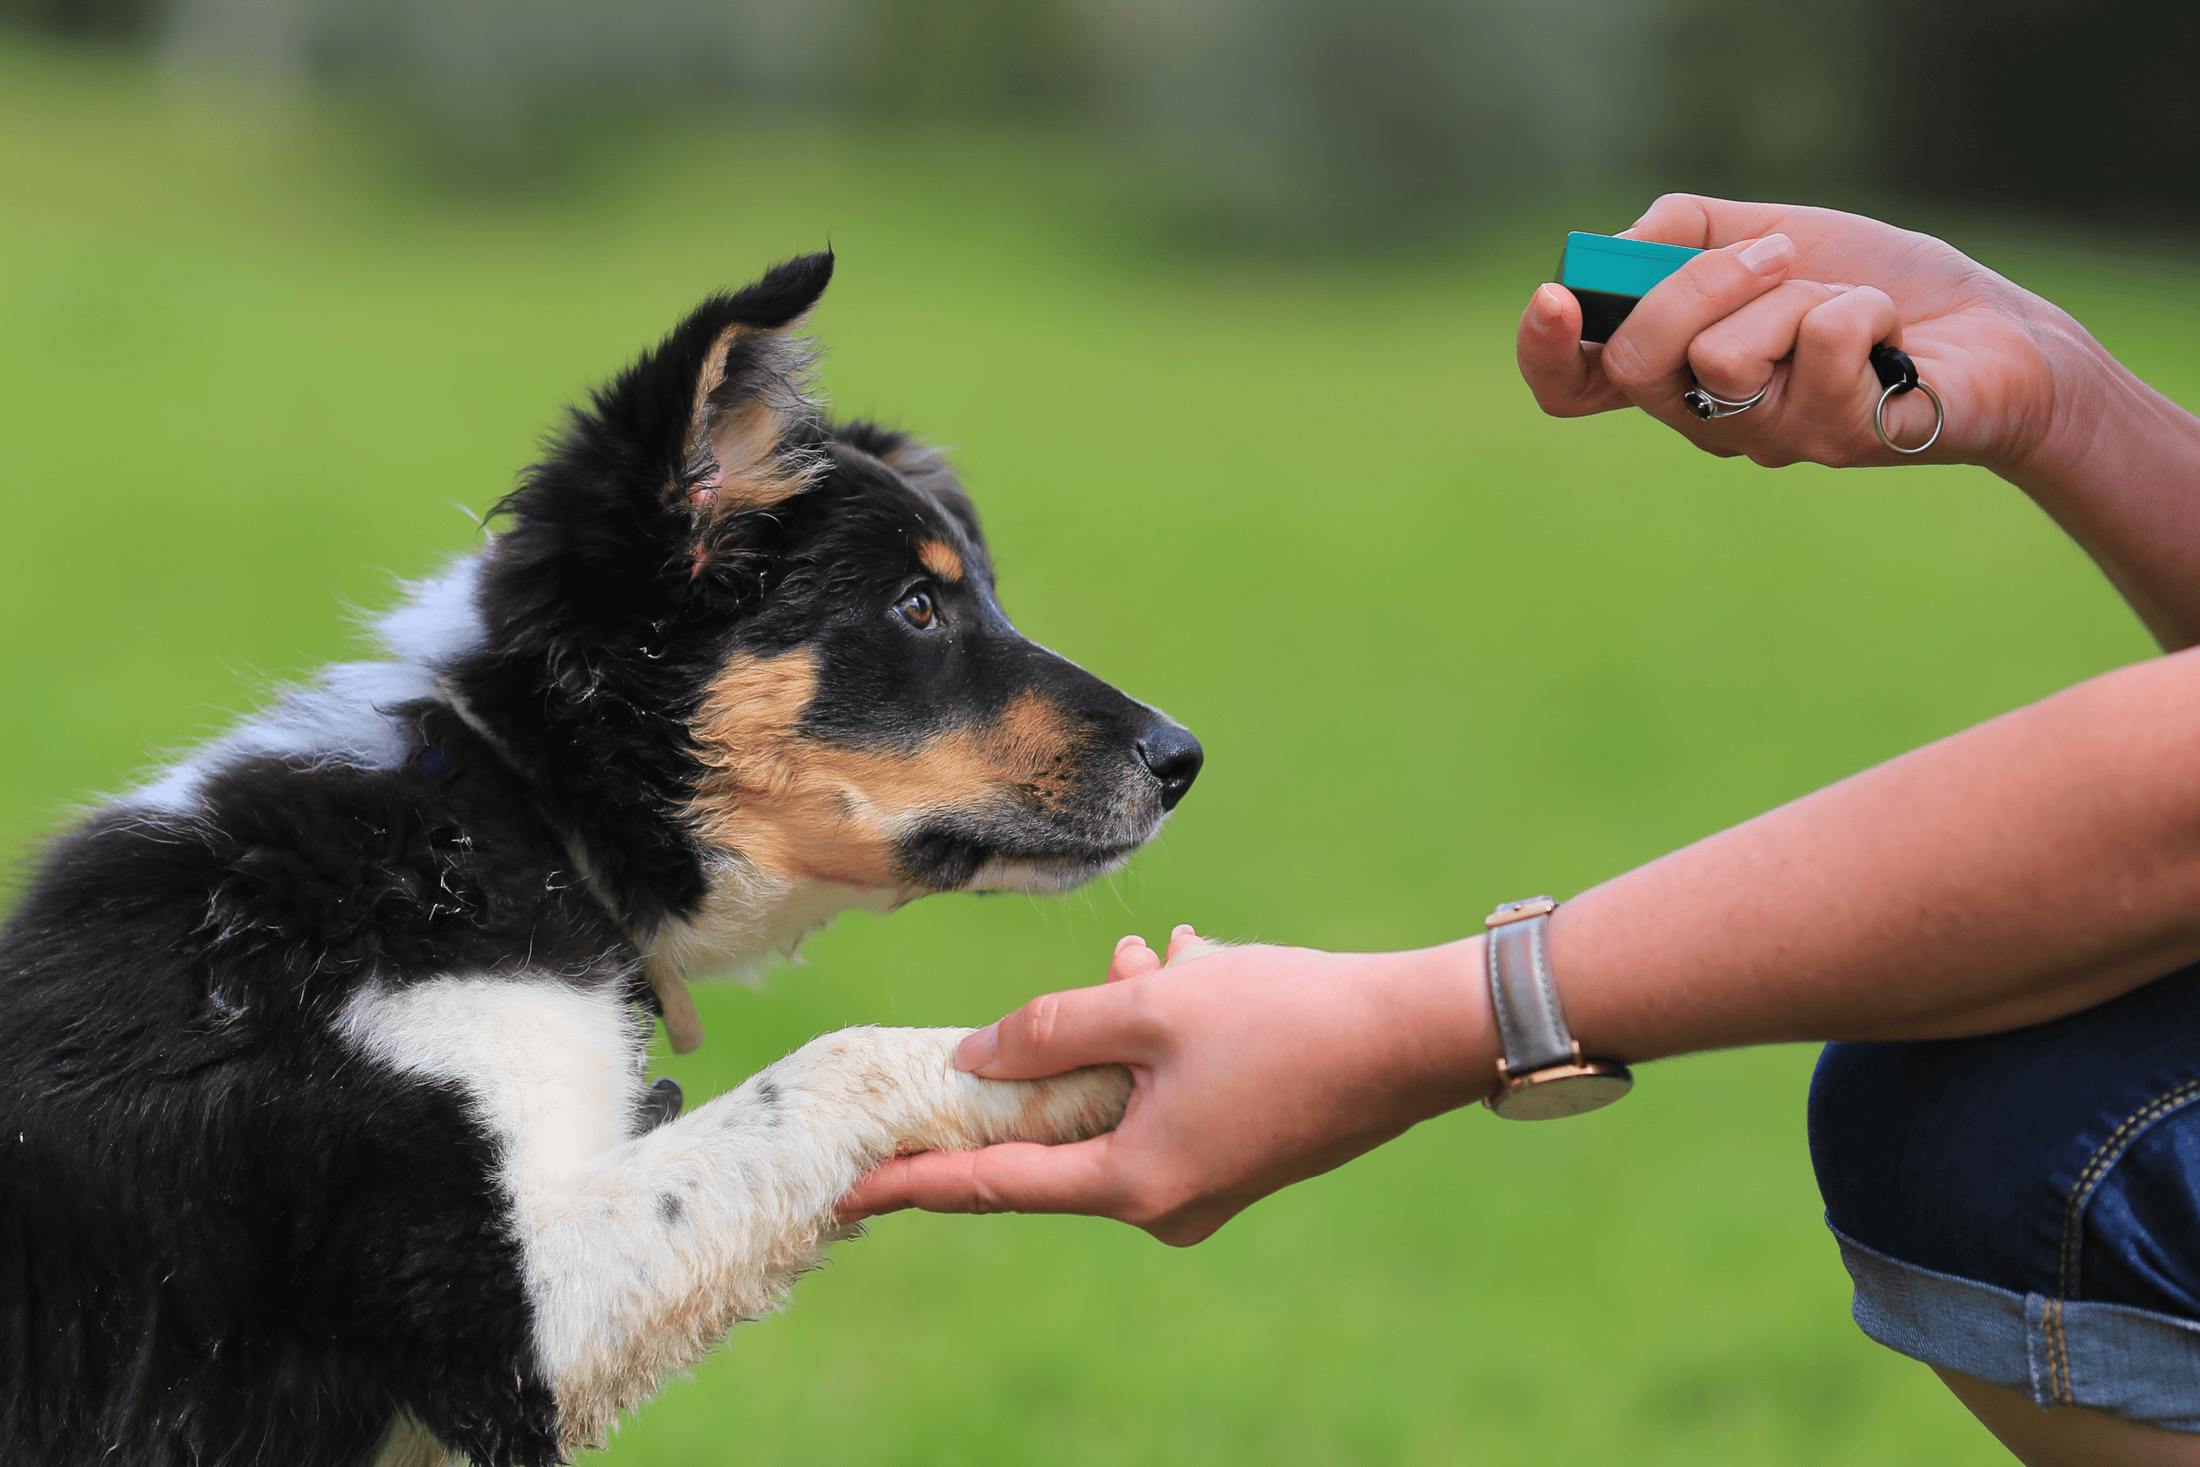 Clicker training is a relatively new method. You click the exact moment your dog performs the desired behavior.